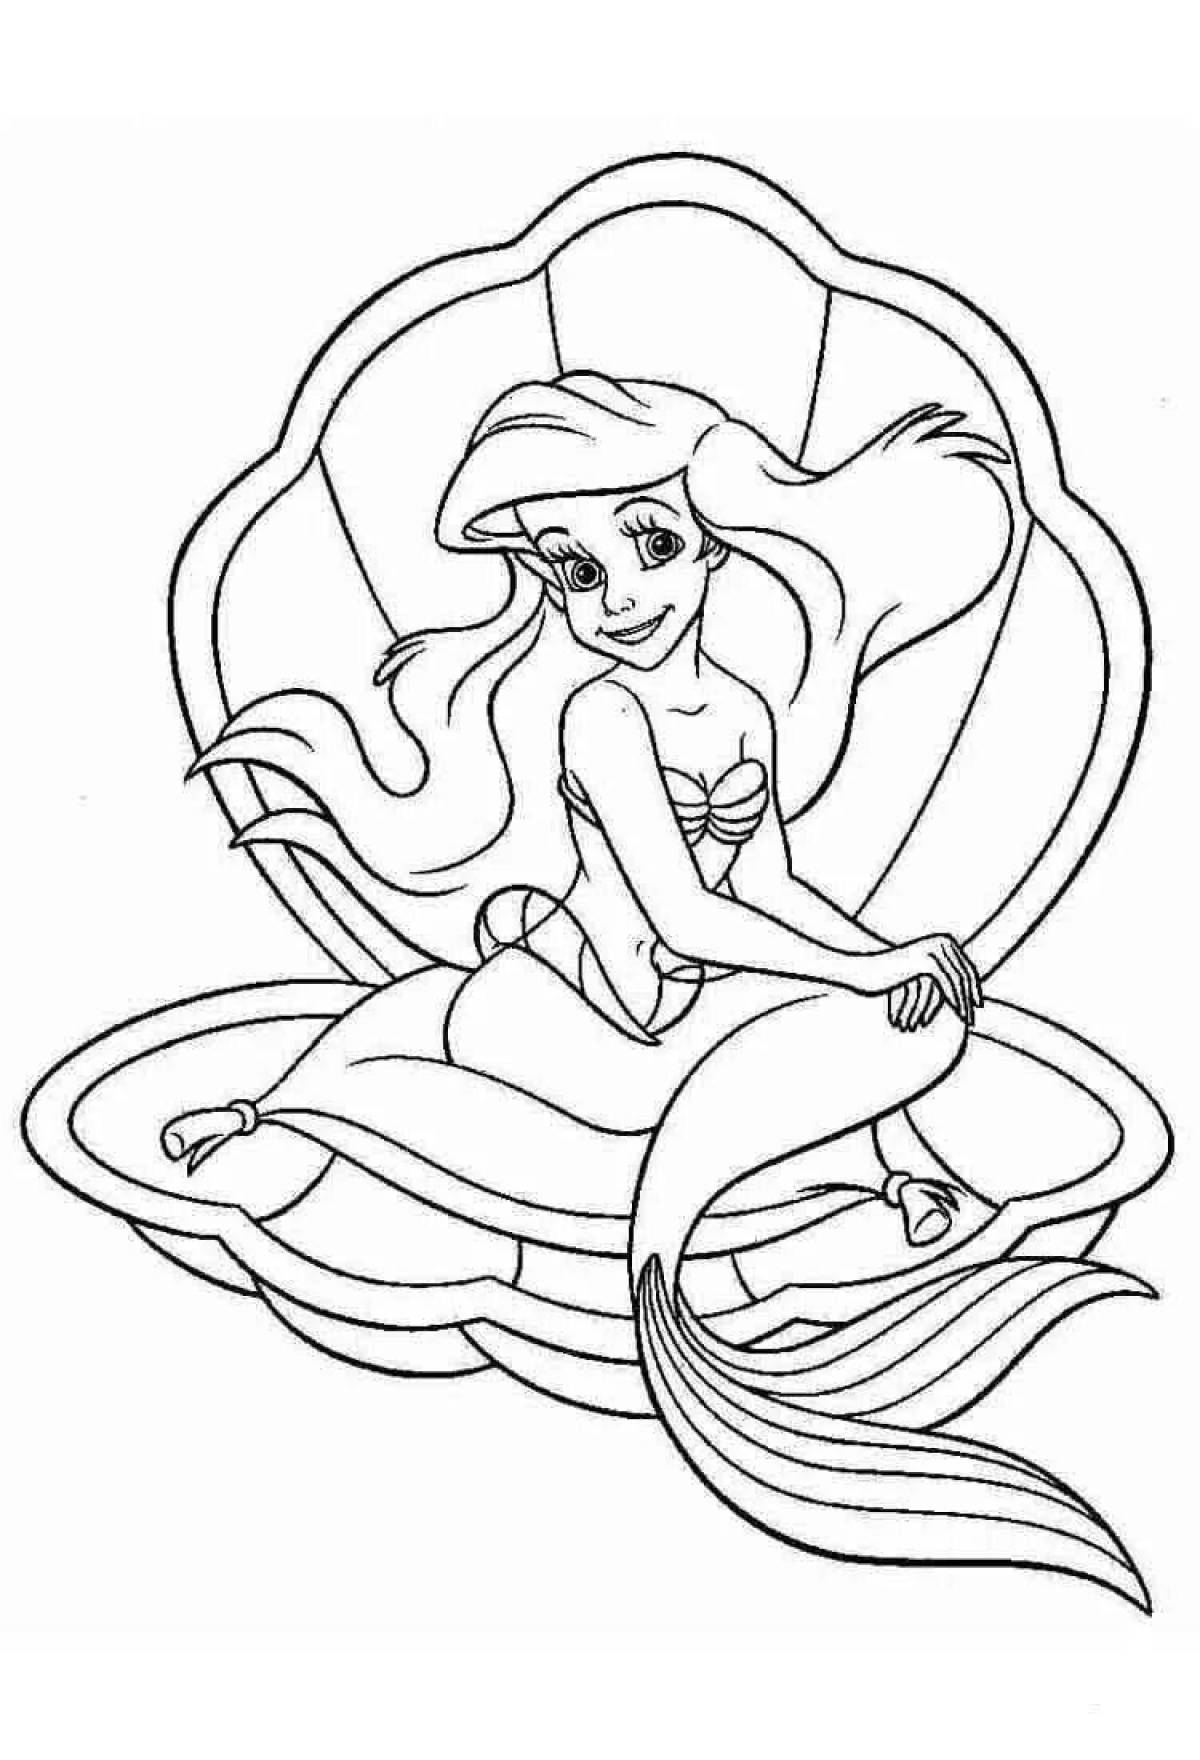 Fairy tale coloring ariel the little mermaid for kids